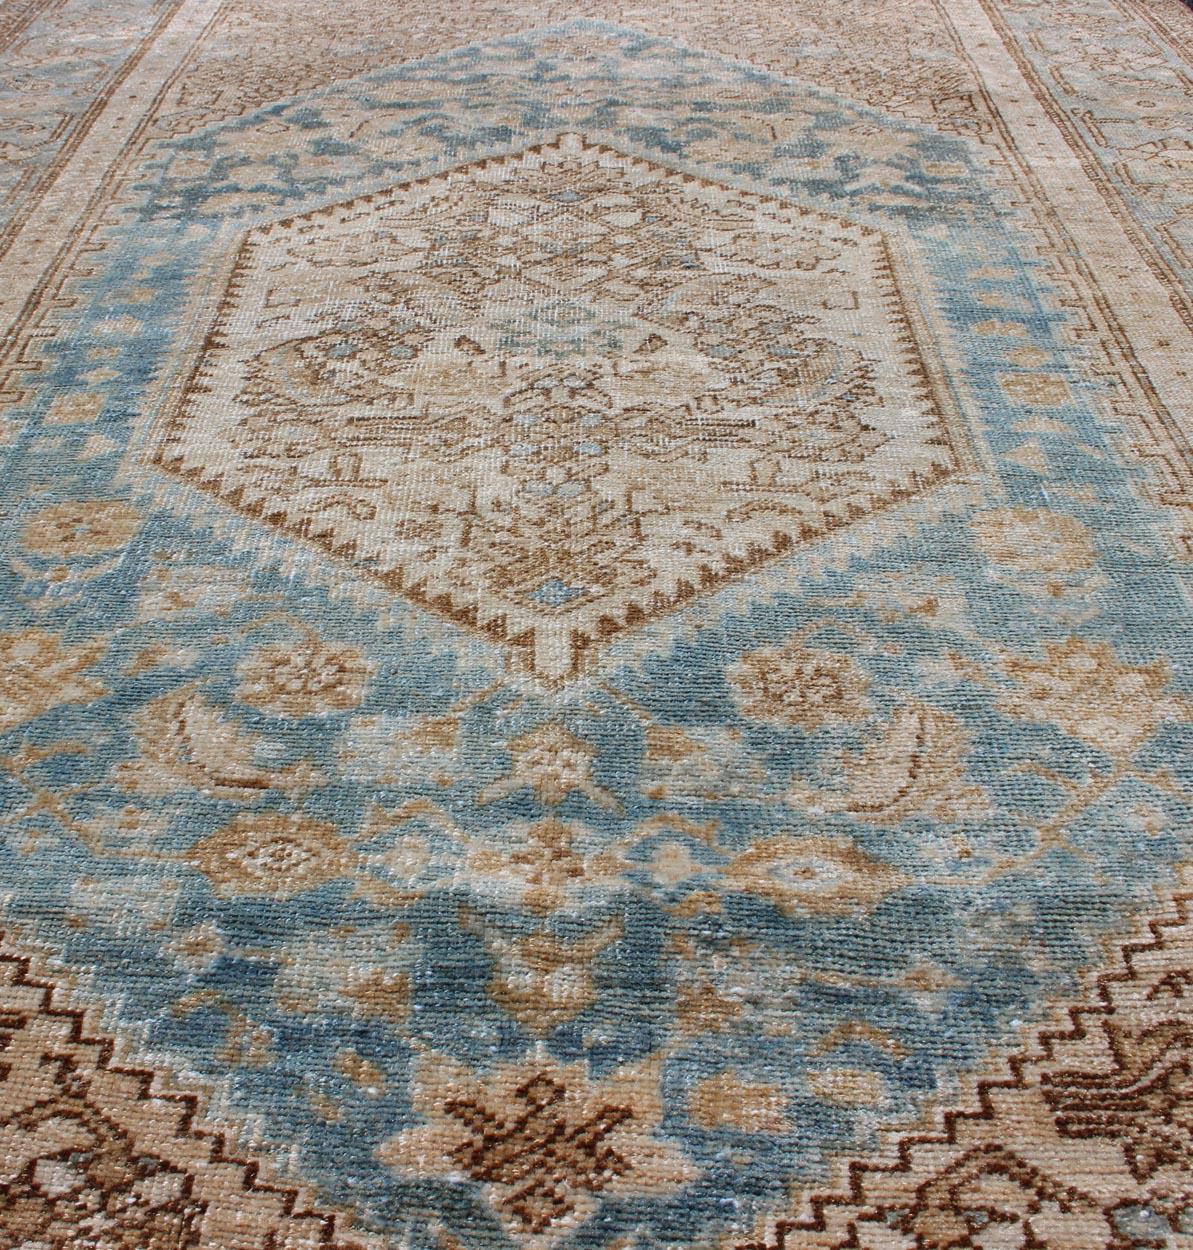 Early 20th Century Antique Persian Hamadan Rug with Layered Medallions in Blue, Brown and Taupe  For Sale